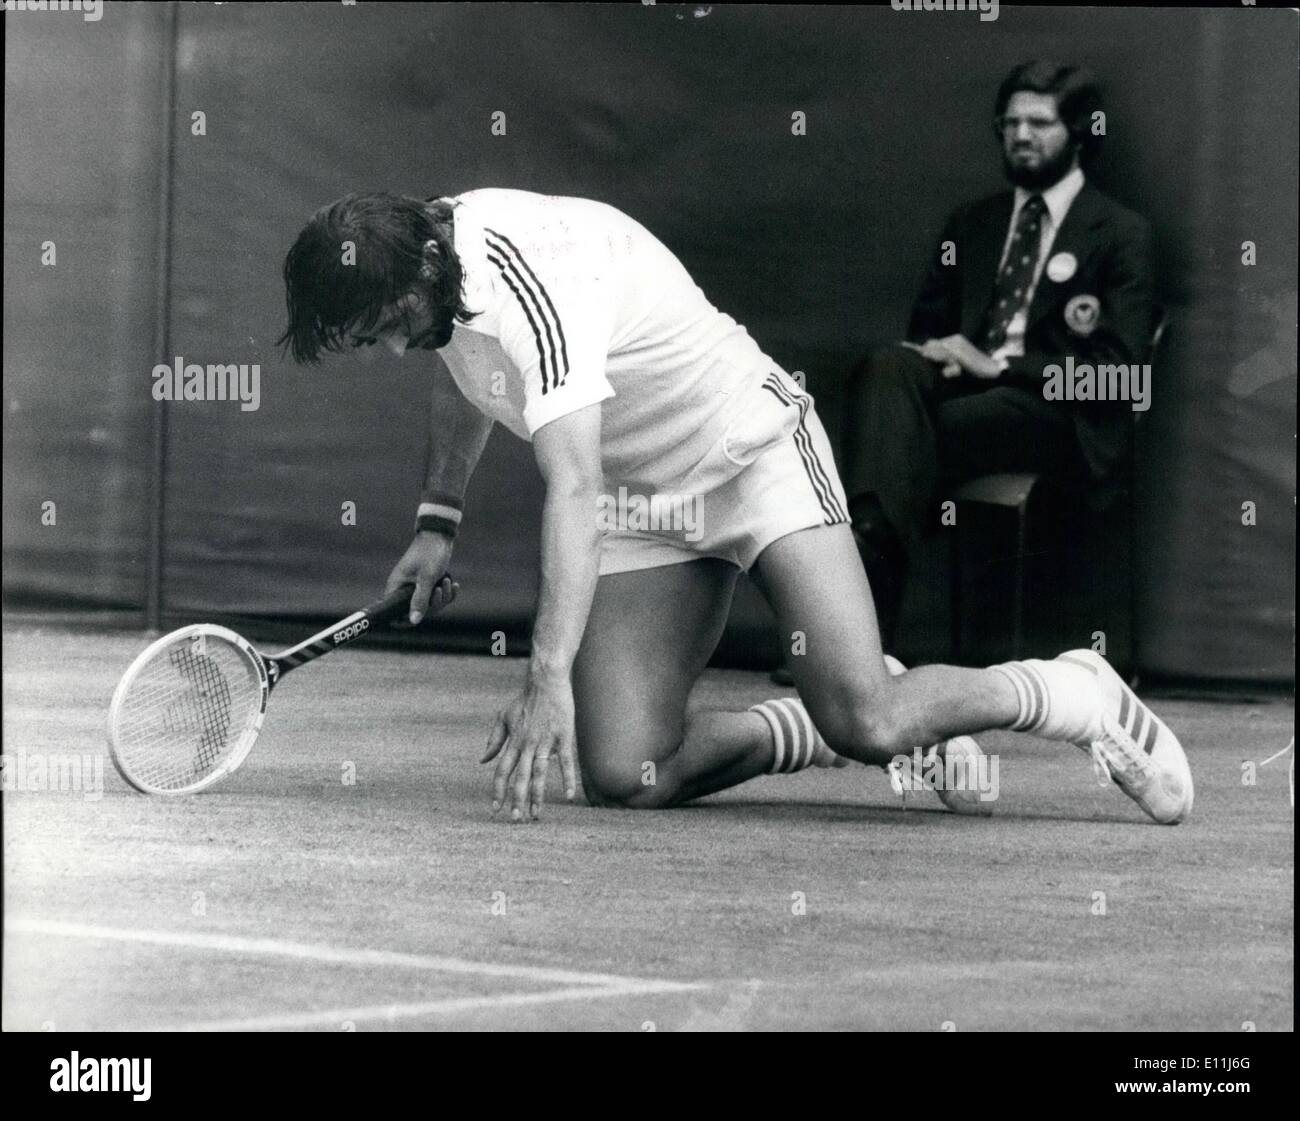 Jul. 07, 1978 - Nastase is beaten by Tom Okker at Wimbledon: Ilie Nastase the Romanian 'bad boy' of tennis and the No 9 seed was knocked out of the Men's singles at Wimbledon yesterday by the unseeded Dutchman Tom Okker. Photo shows Tom Okker seen in action against i Nastase at Wimbledon yesterday. Okker won 7- 6-1 2-6 6-3. He will play Bjorn Borg of Sweden the defending champion in the semi-final on Thursday. Stock Photo